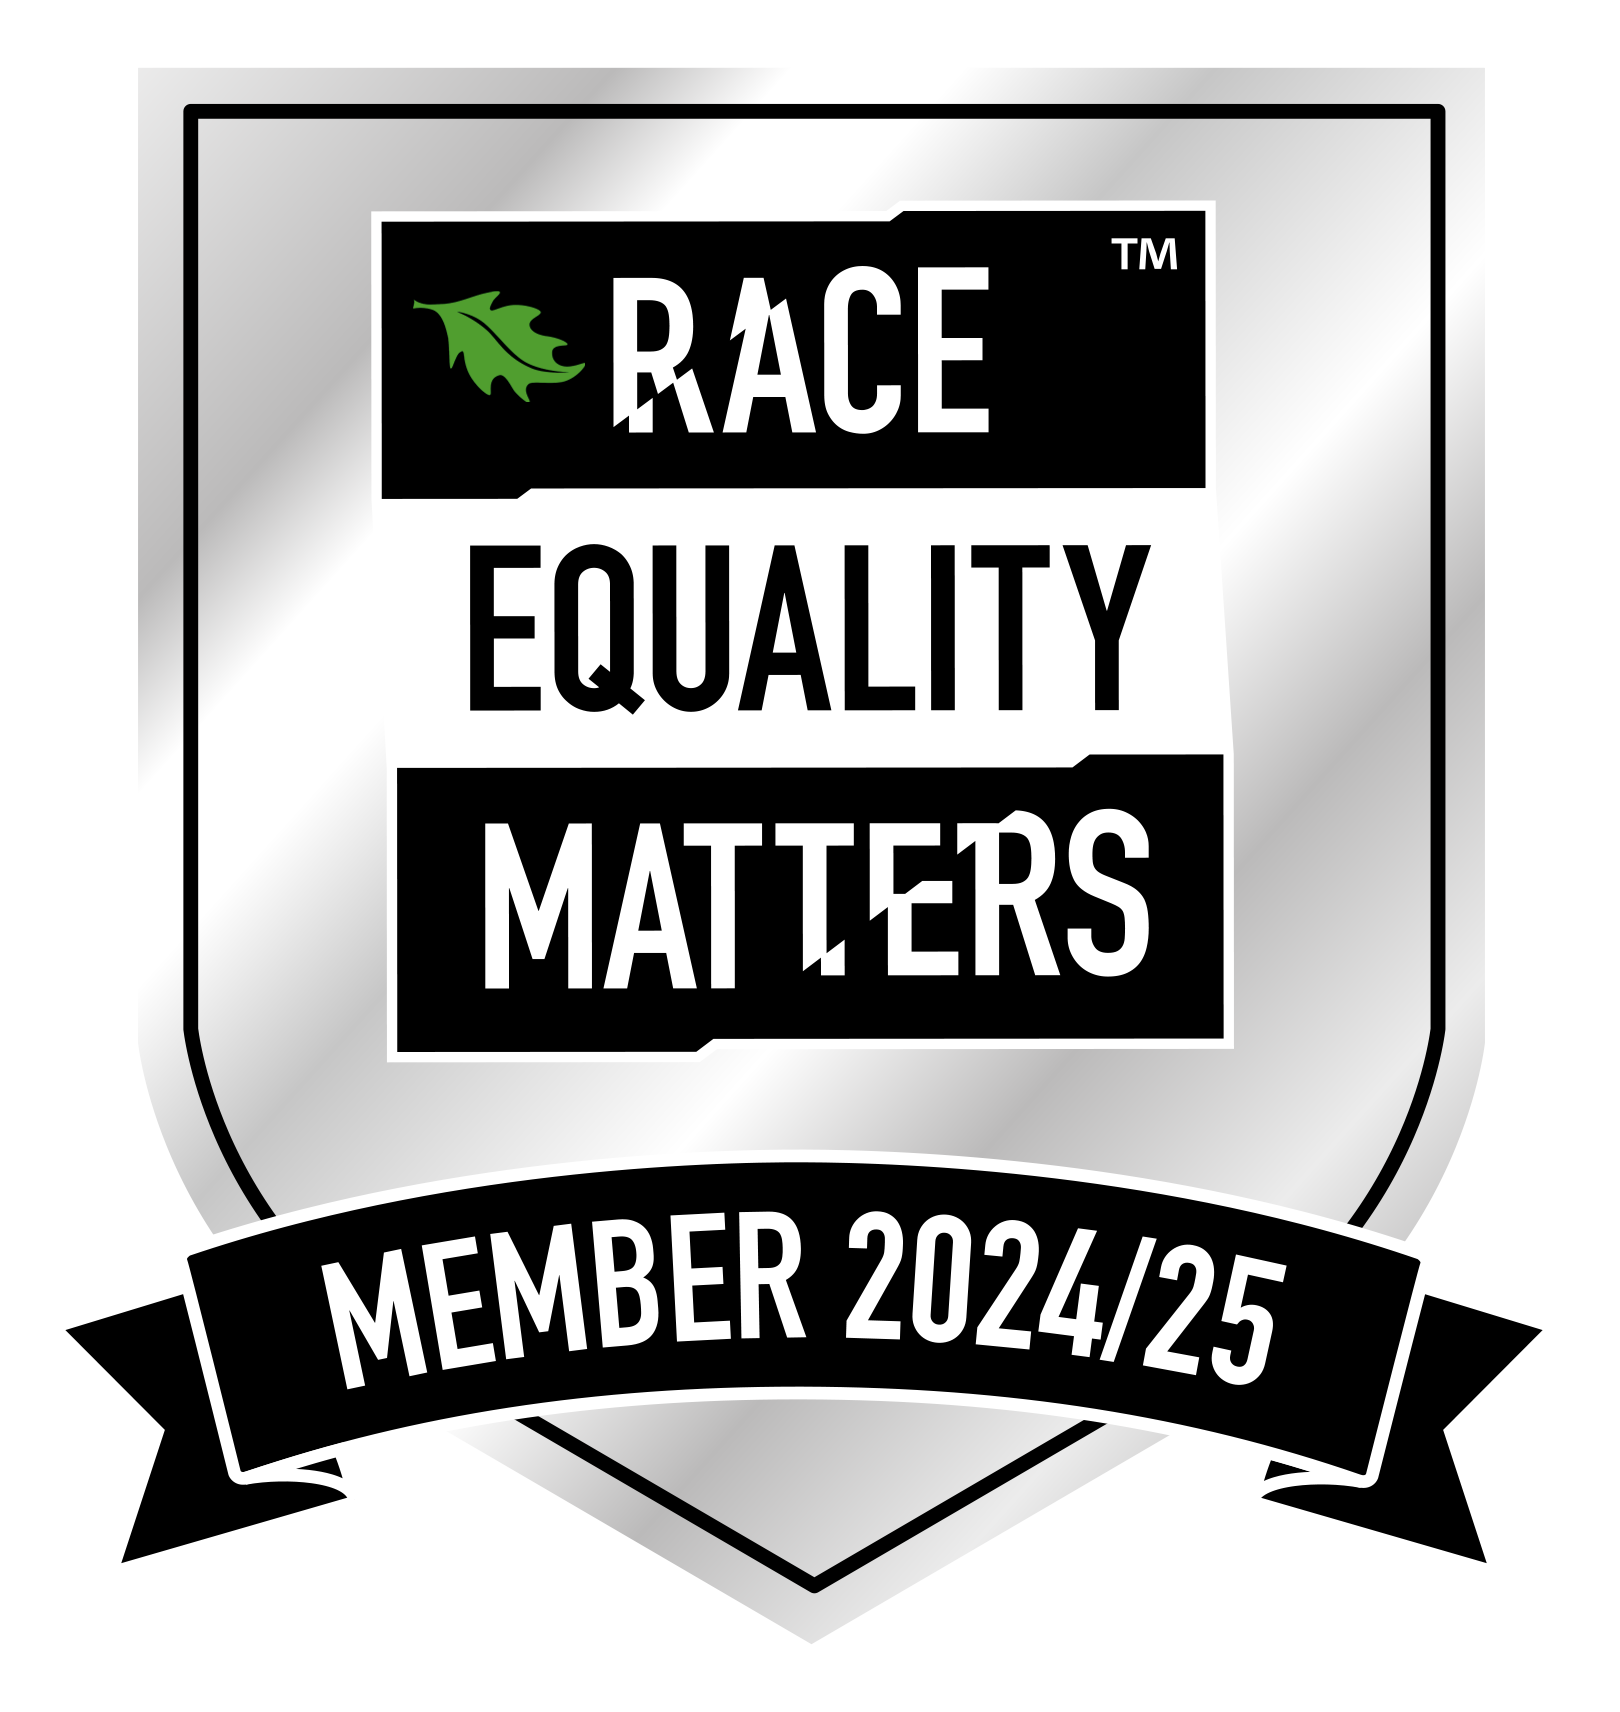 Race Equality Matters member 2024-25